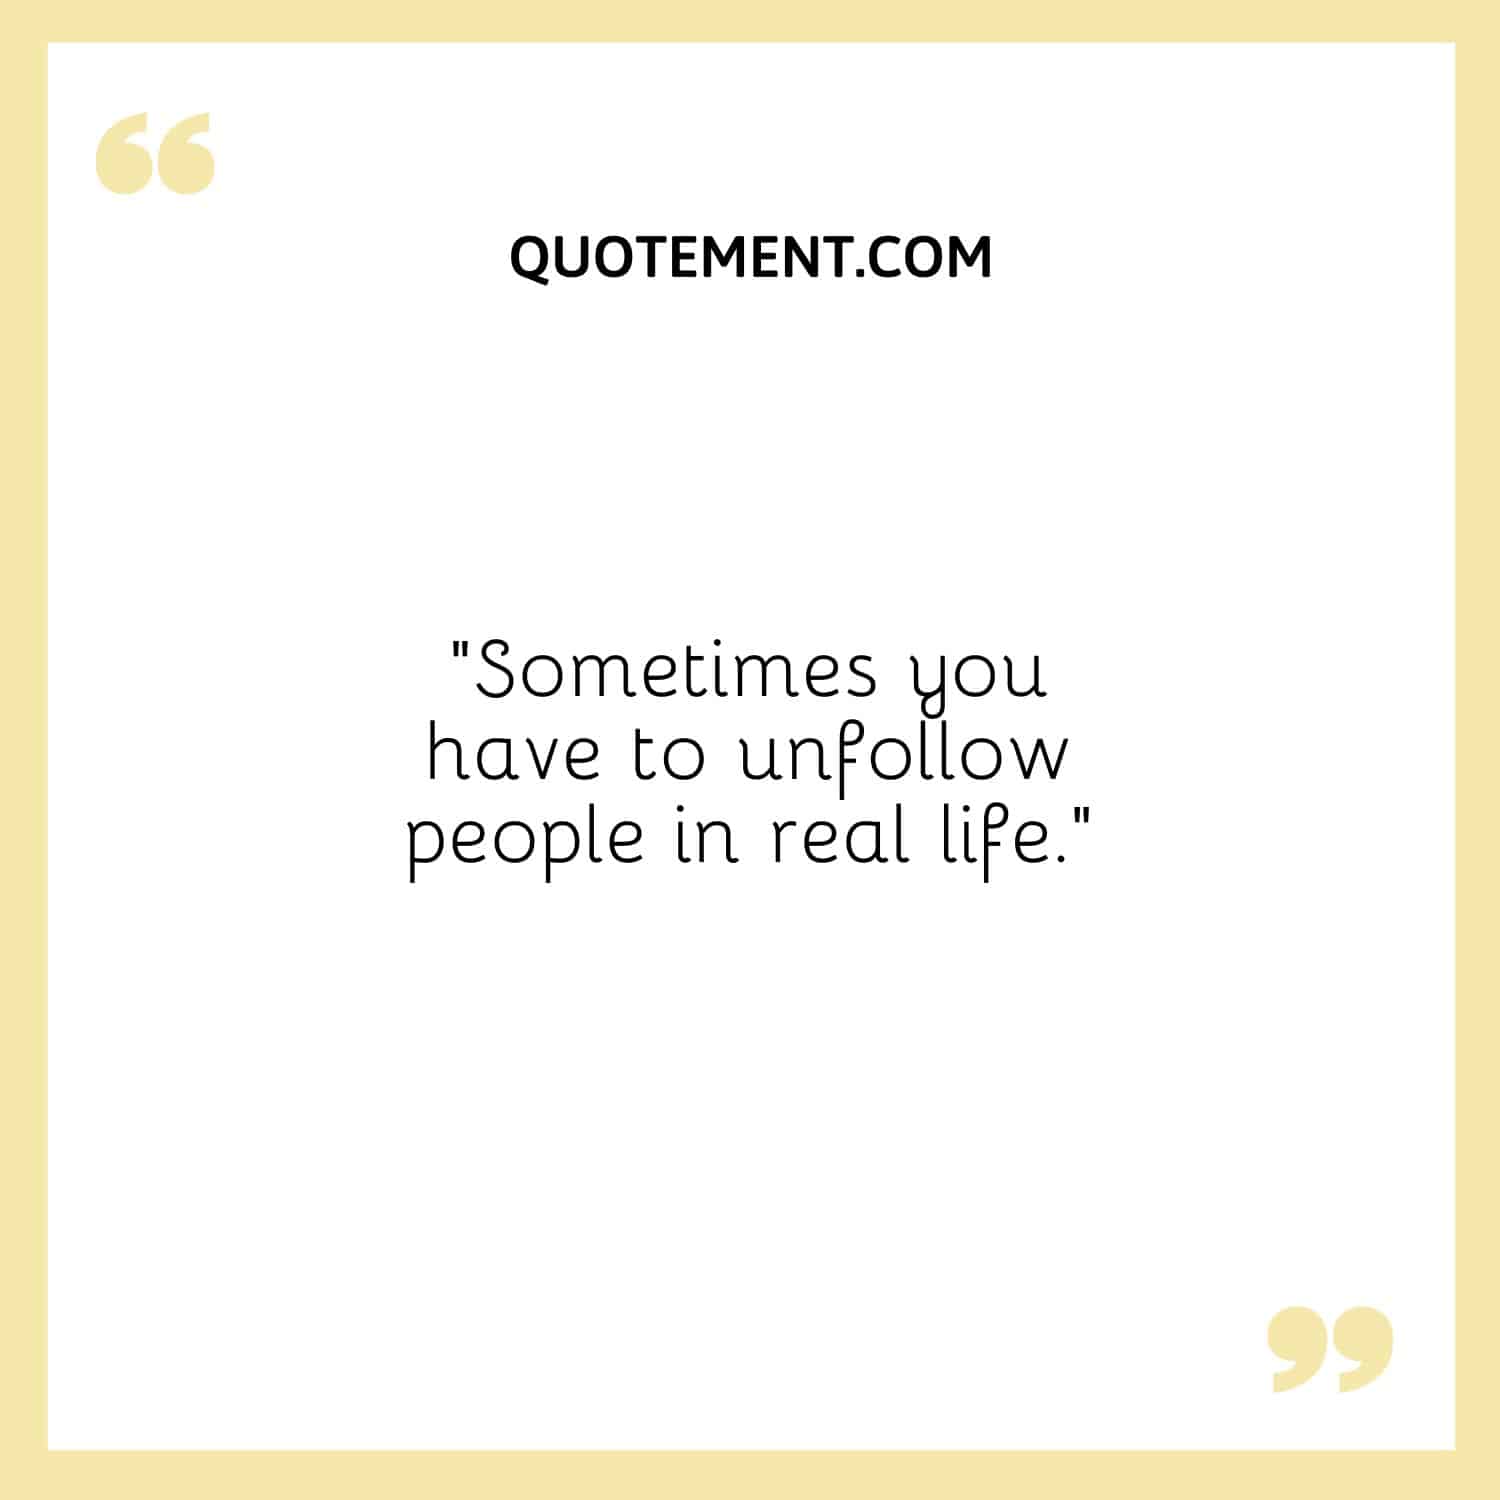 “Sometimes you have to unfollow people in real life.”